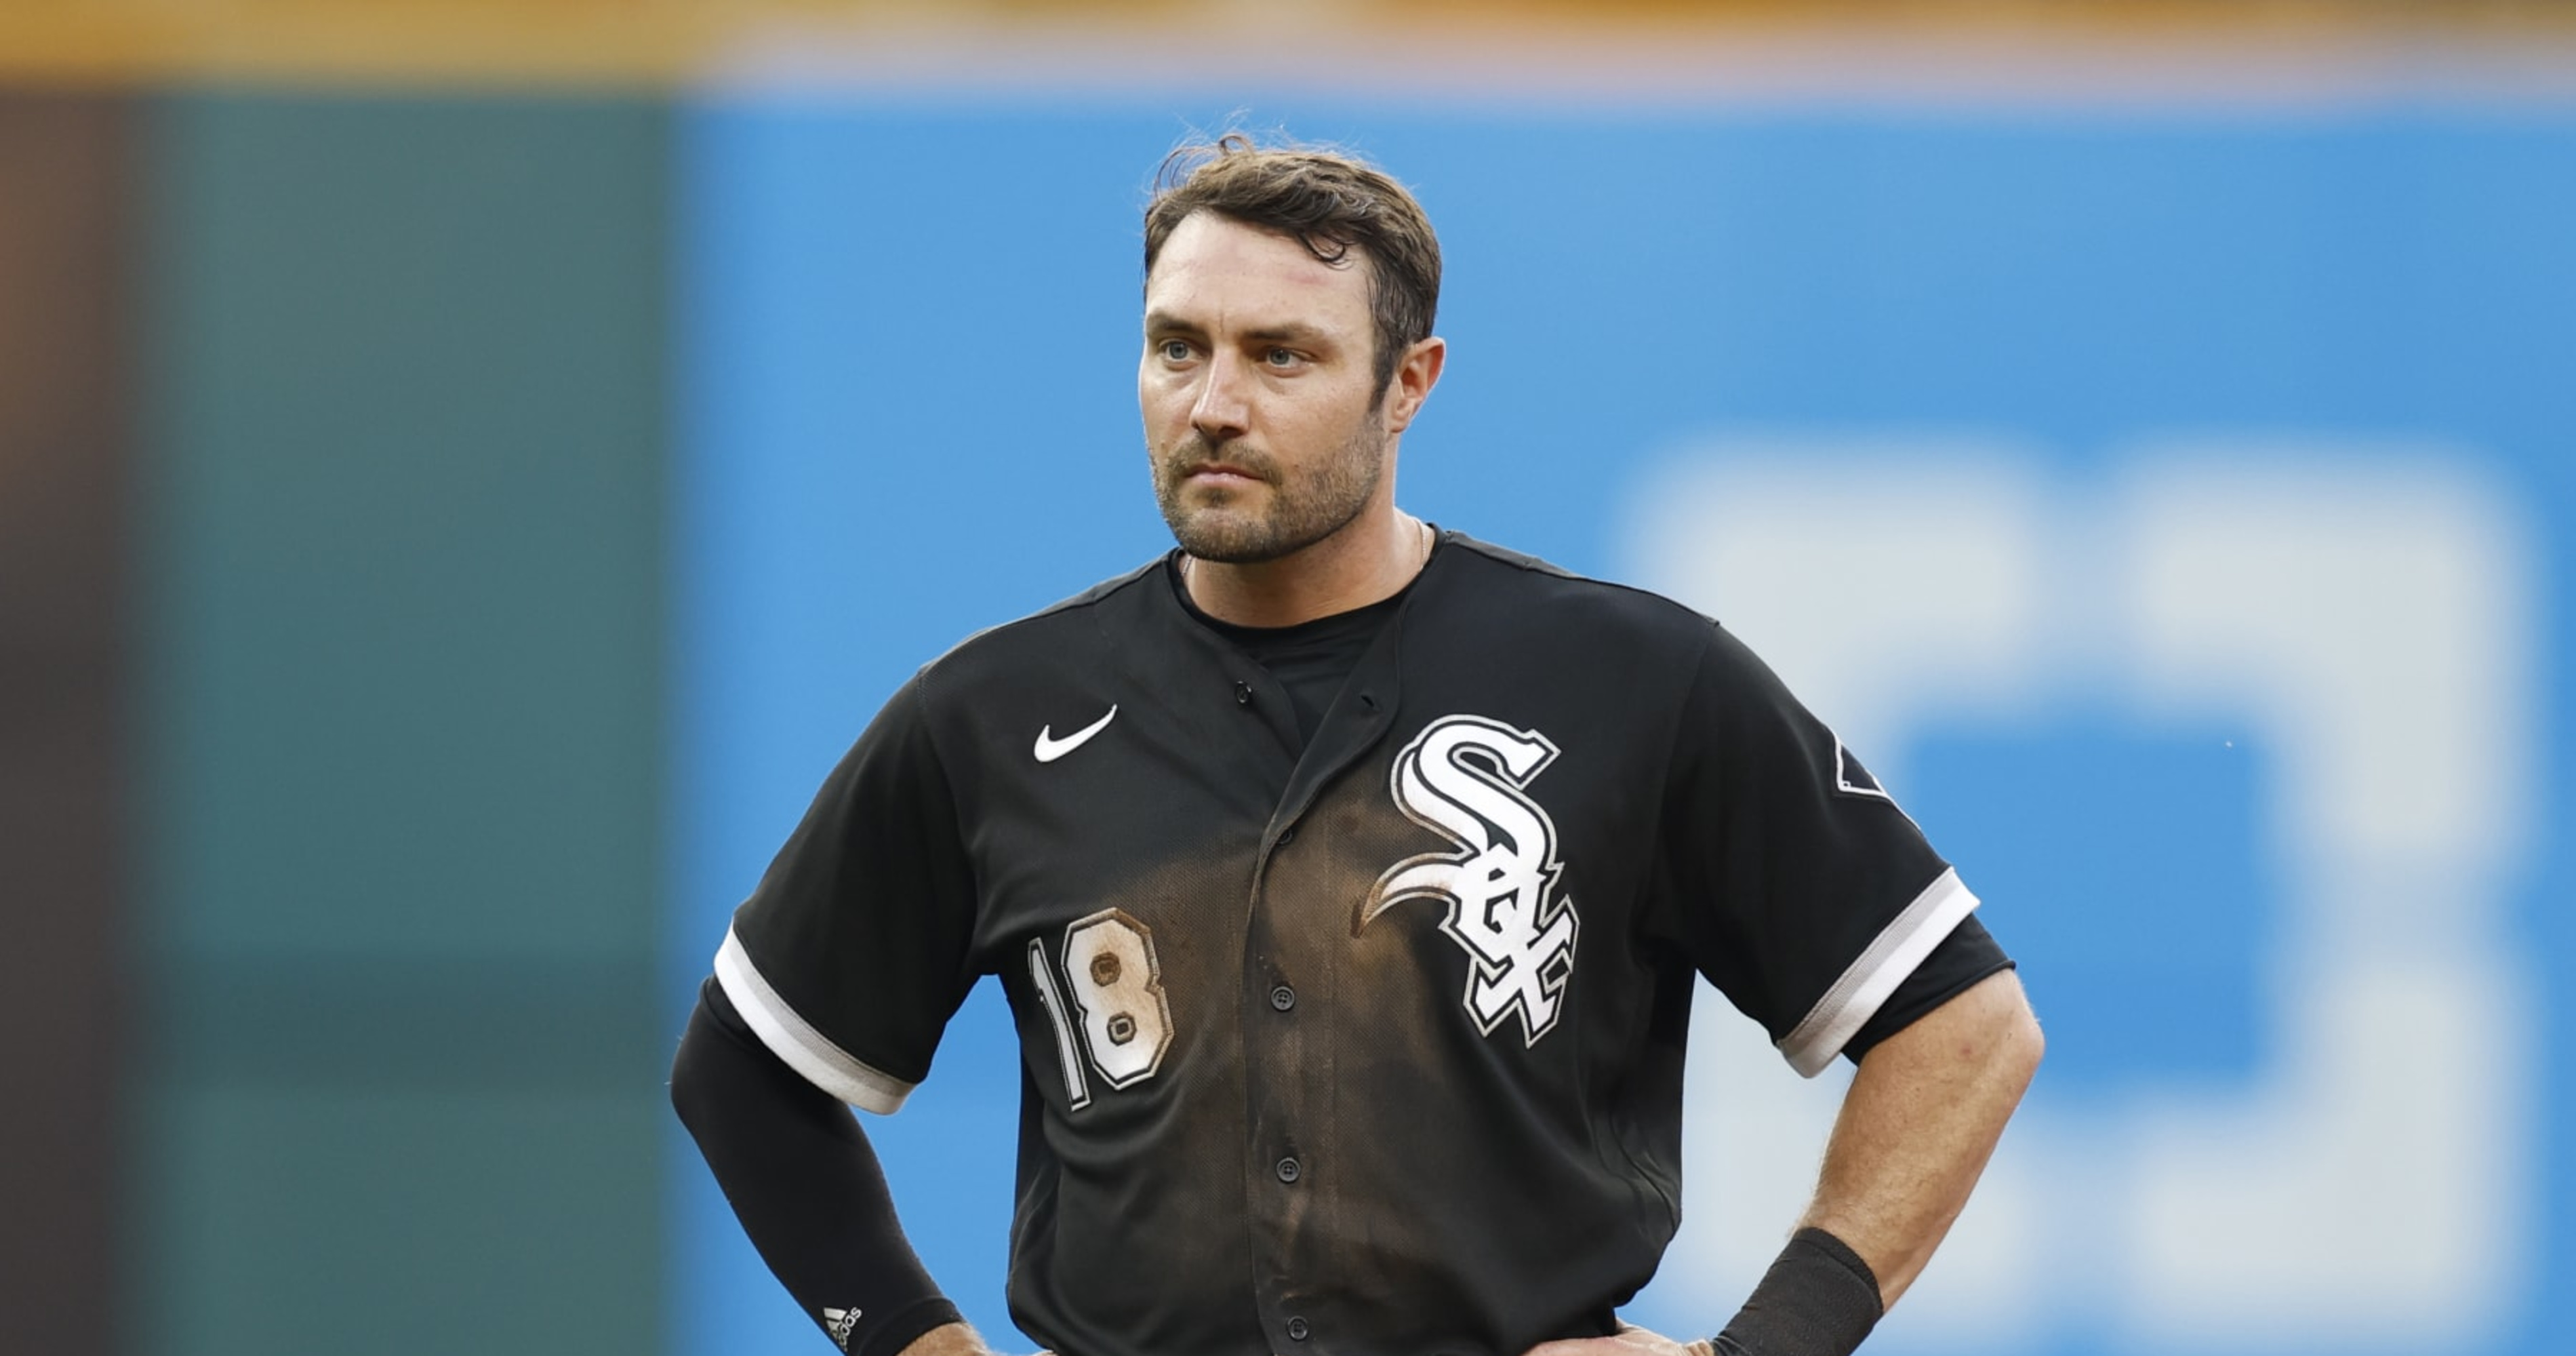 Report: AJ Pollock Declines $13M White Sox Contract Option, Becomes Free Agent